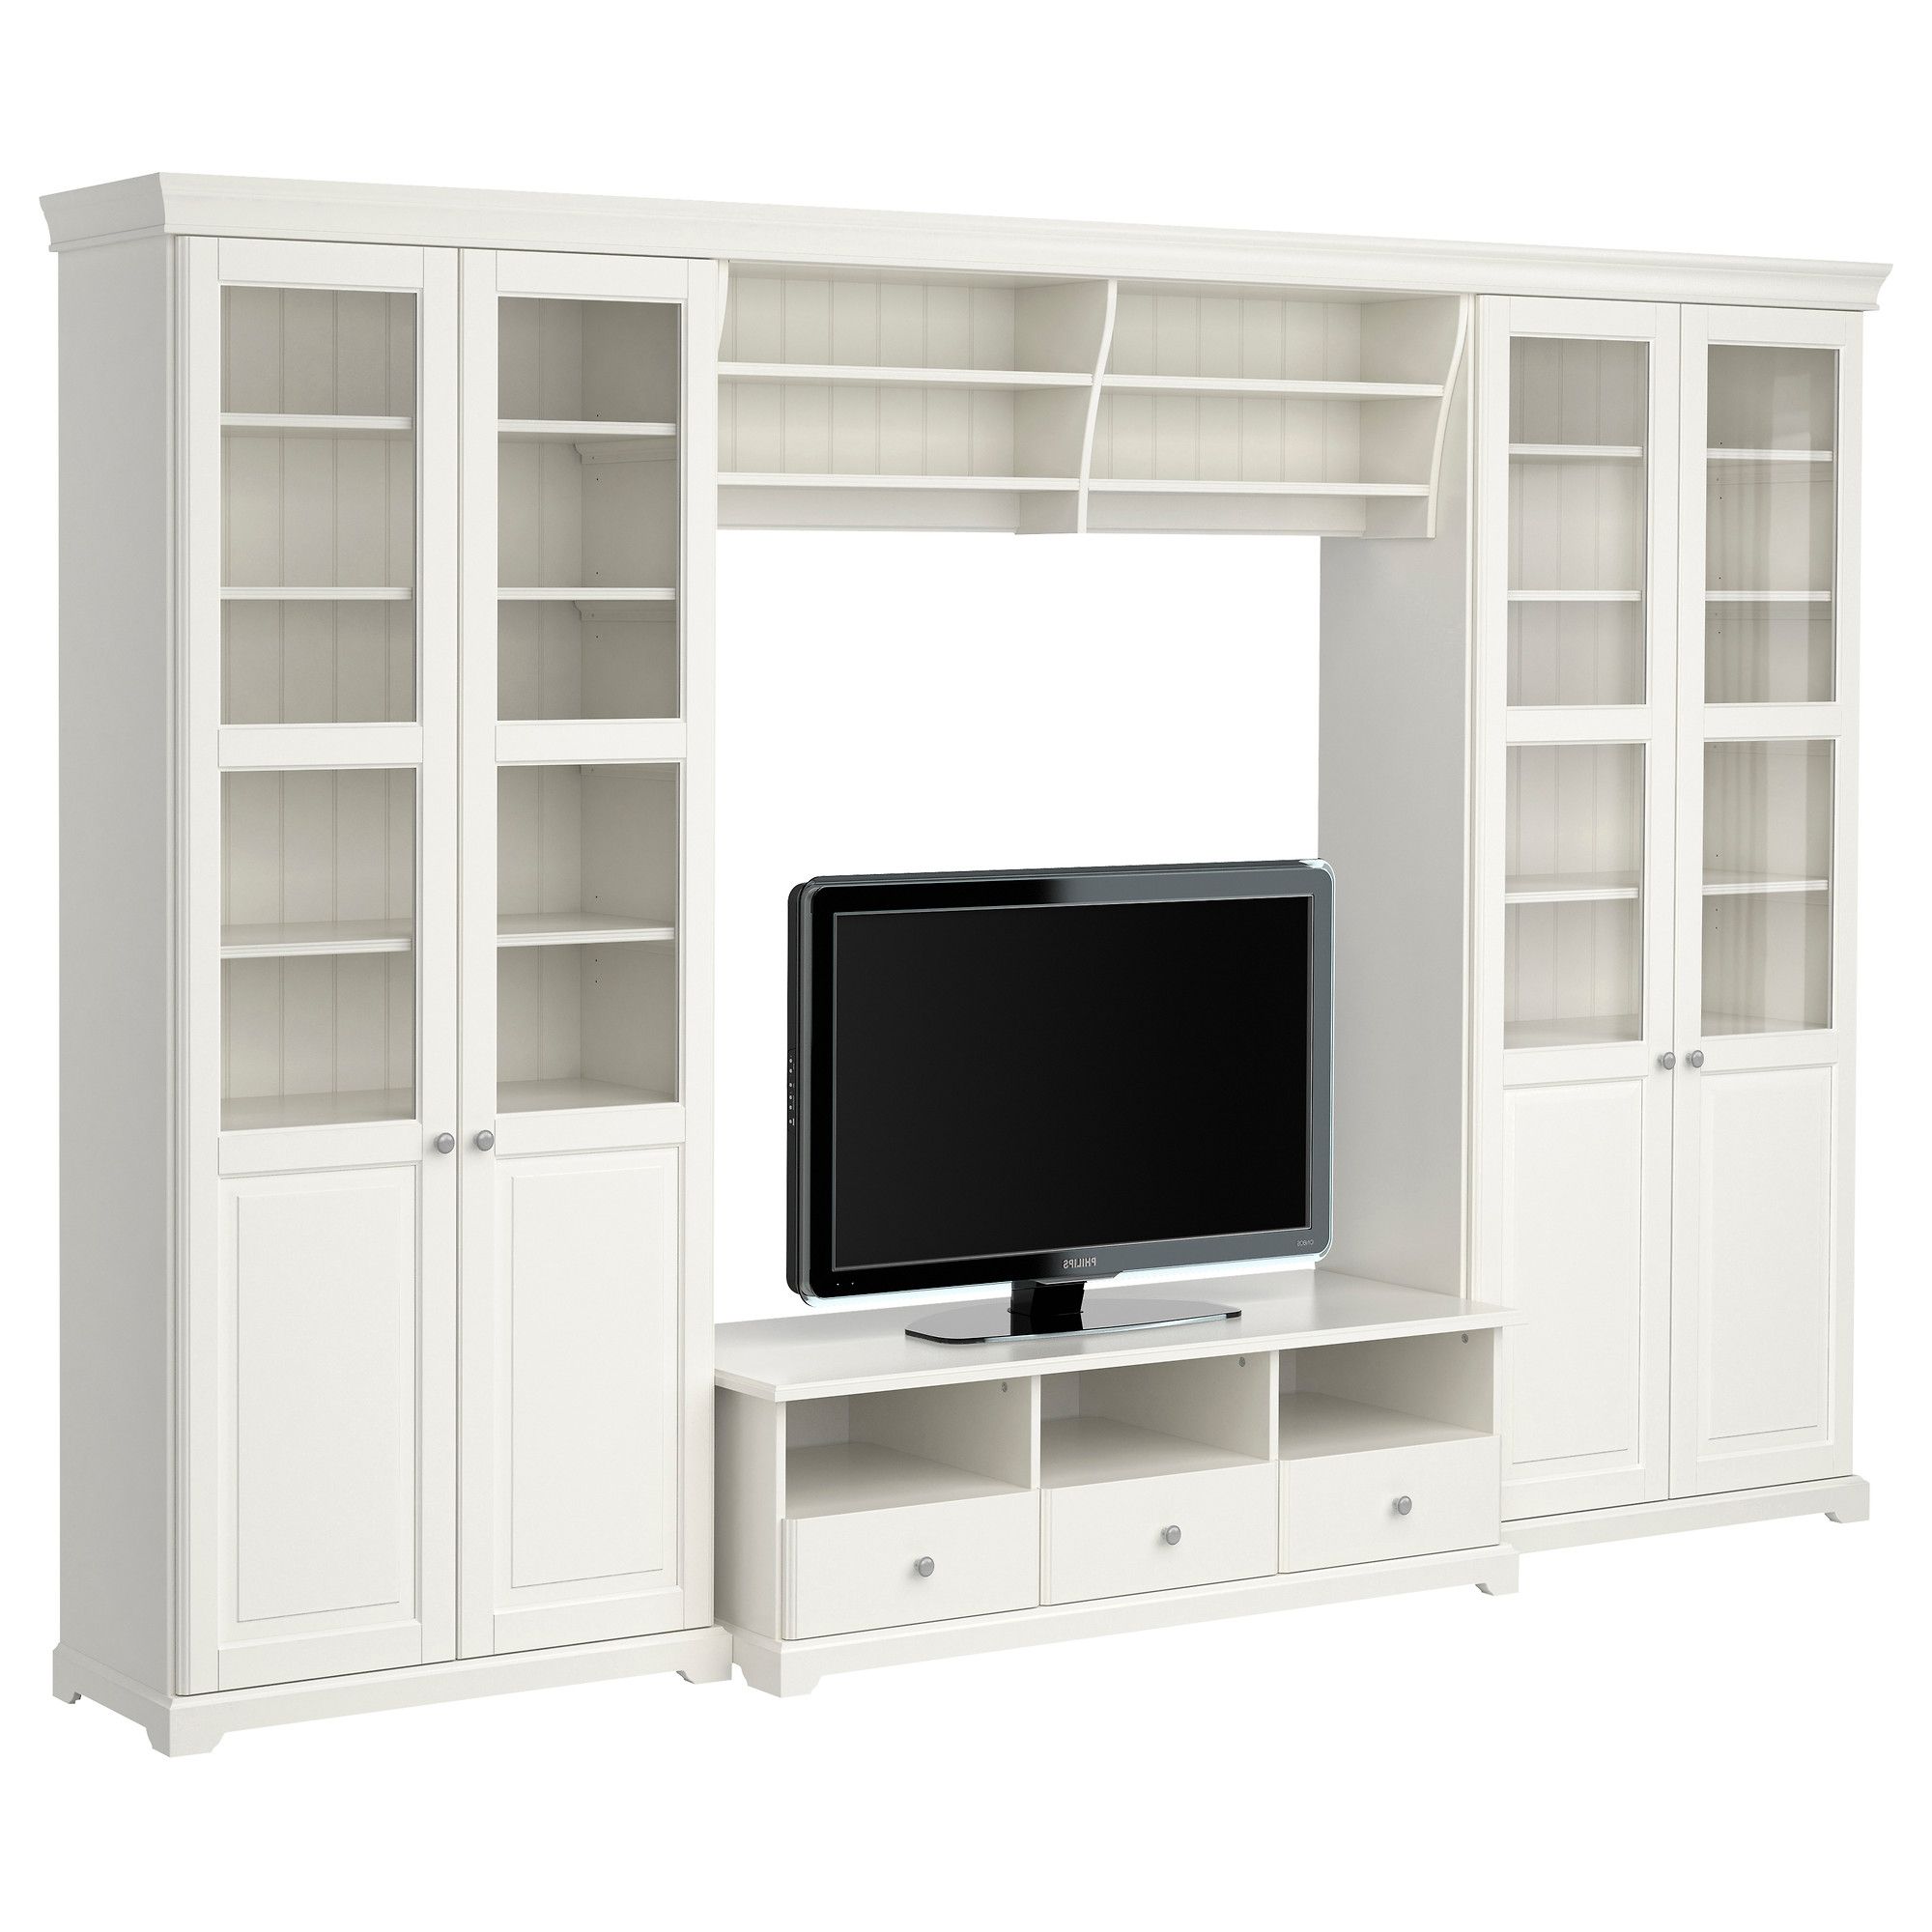 Tv Stands Bookshelf Combo With Regard To Most Up To Date Furniture: Display Space For Audio Components And Collectibles With (View 11 of 20)